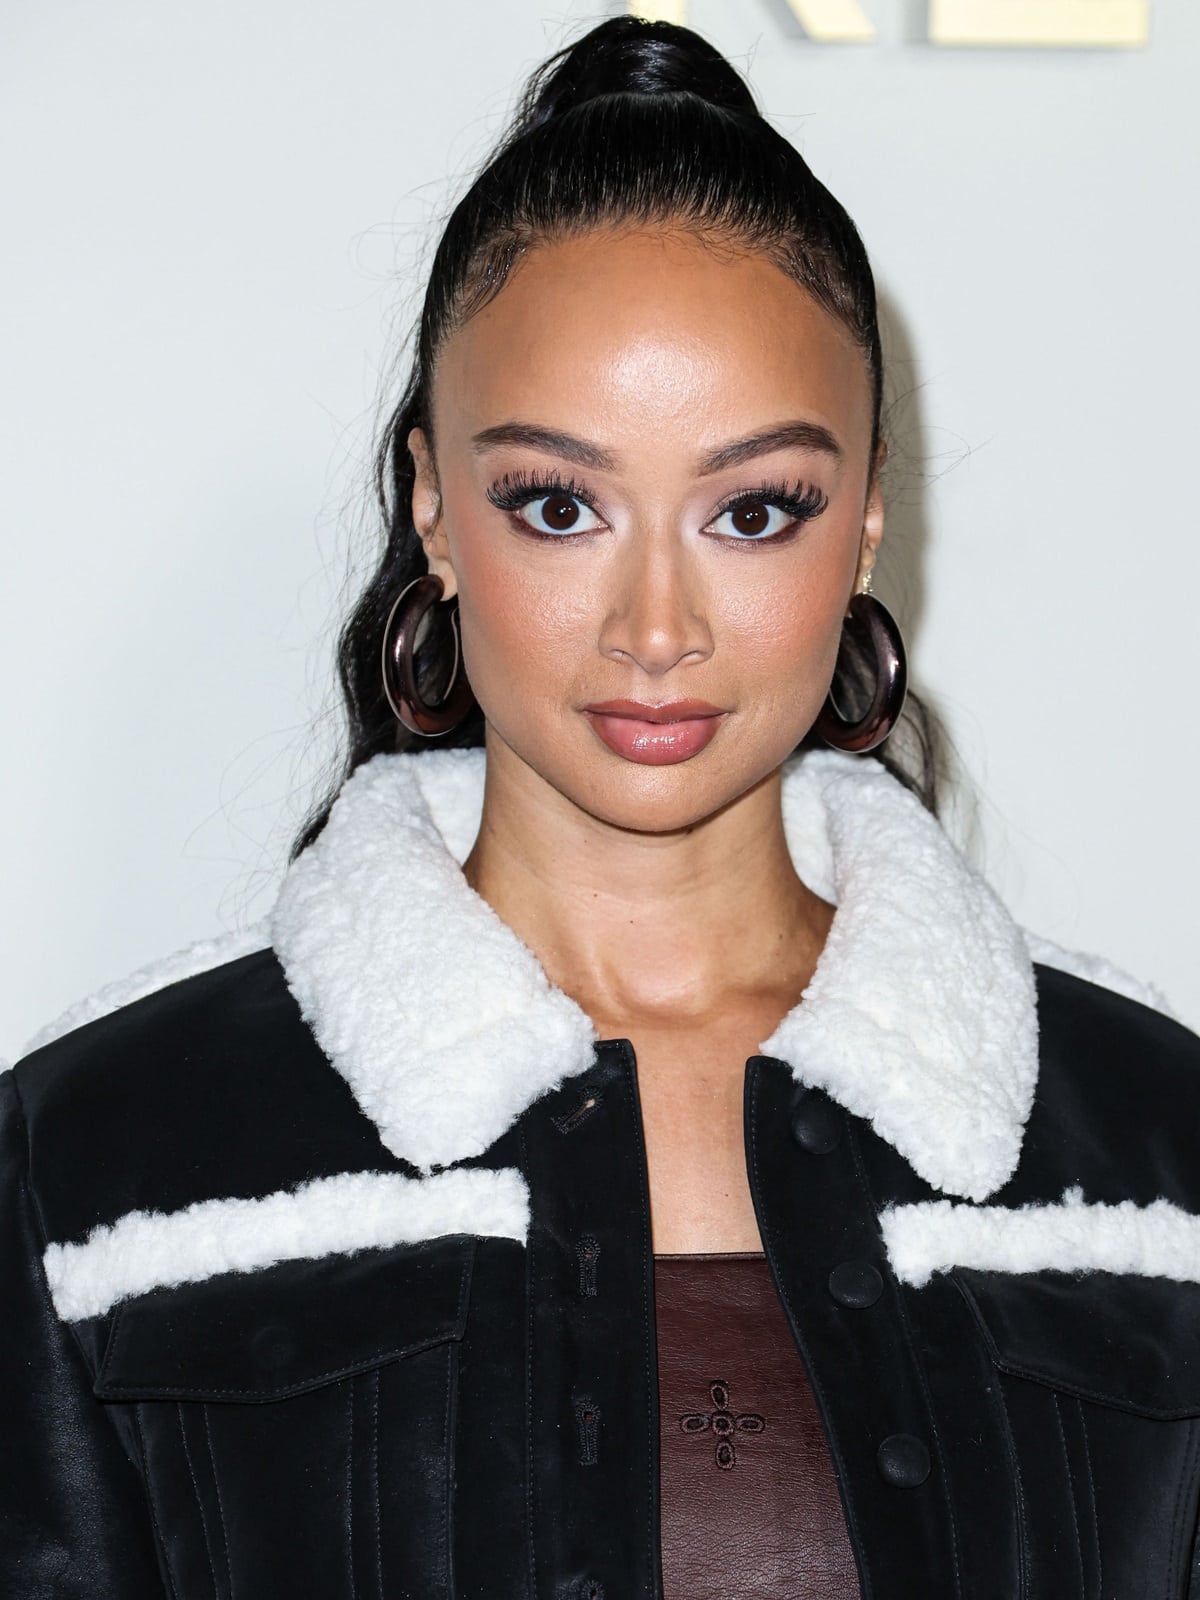 Draya Michele stands at 5ft 5 inches (165.1 cm) and is a model and reality TV star with a net worth of $600,000